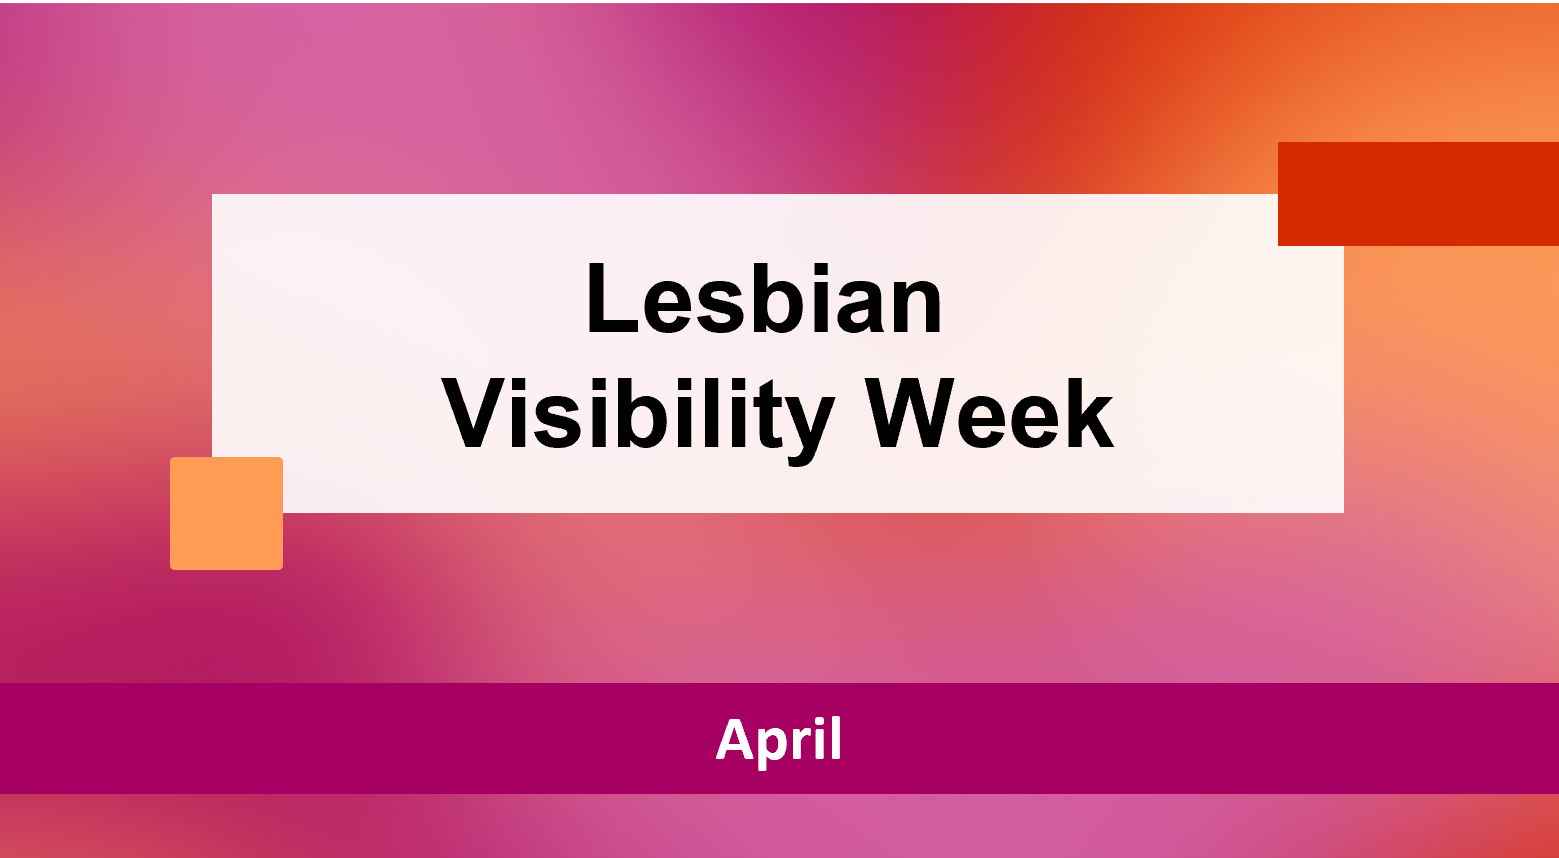 Abstract lesbian flag, overlaid with "Lesbian Visibility Week"